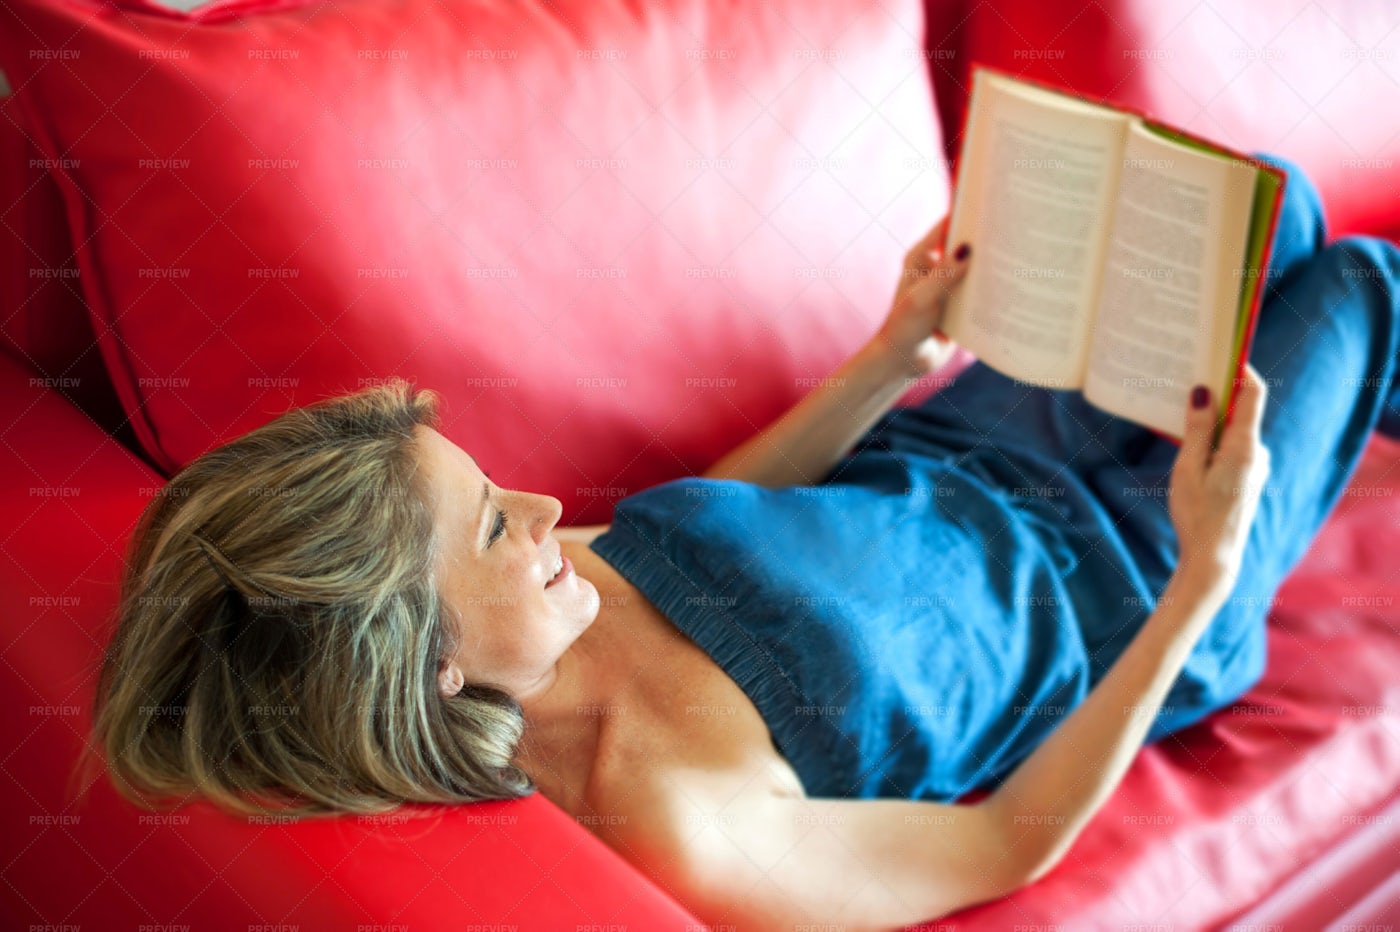 Woman Smiling As She Reads: Stock Photos